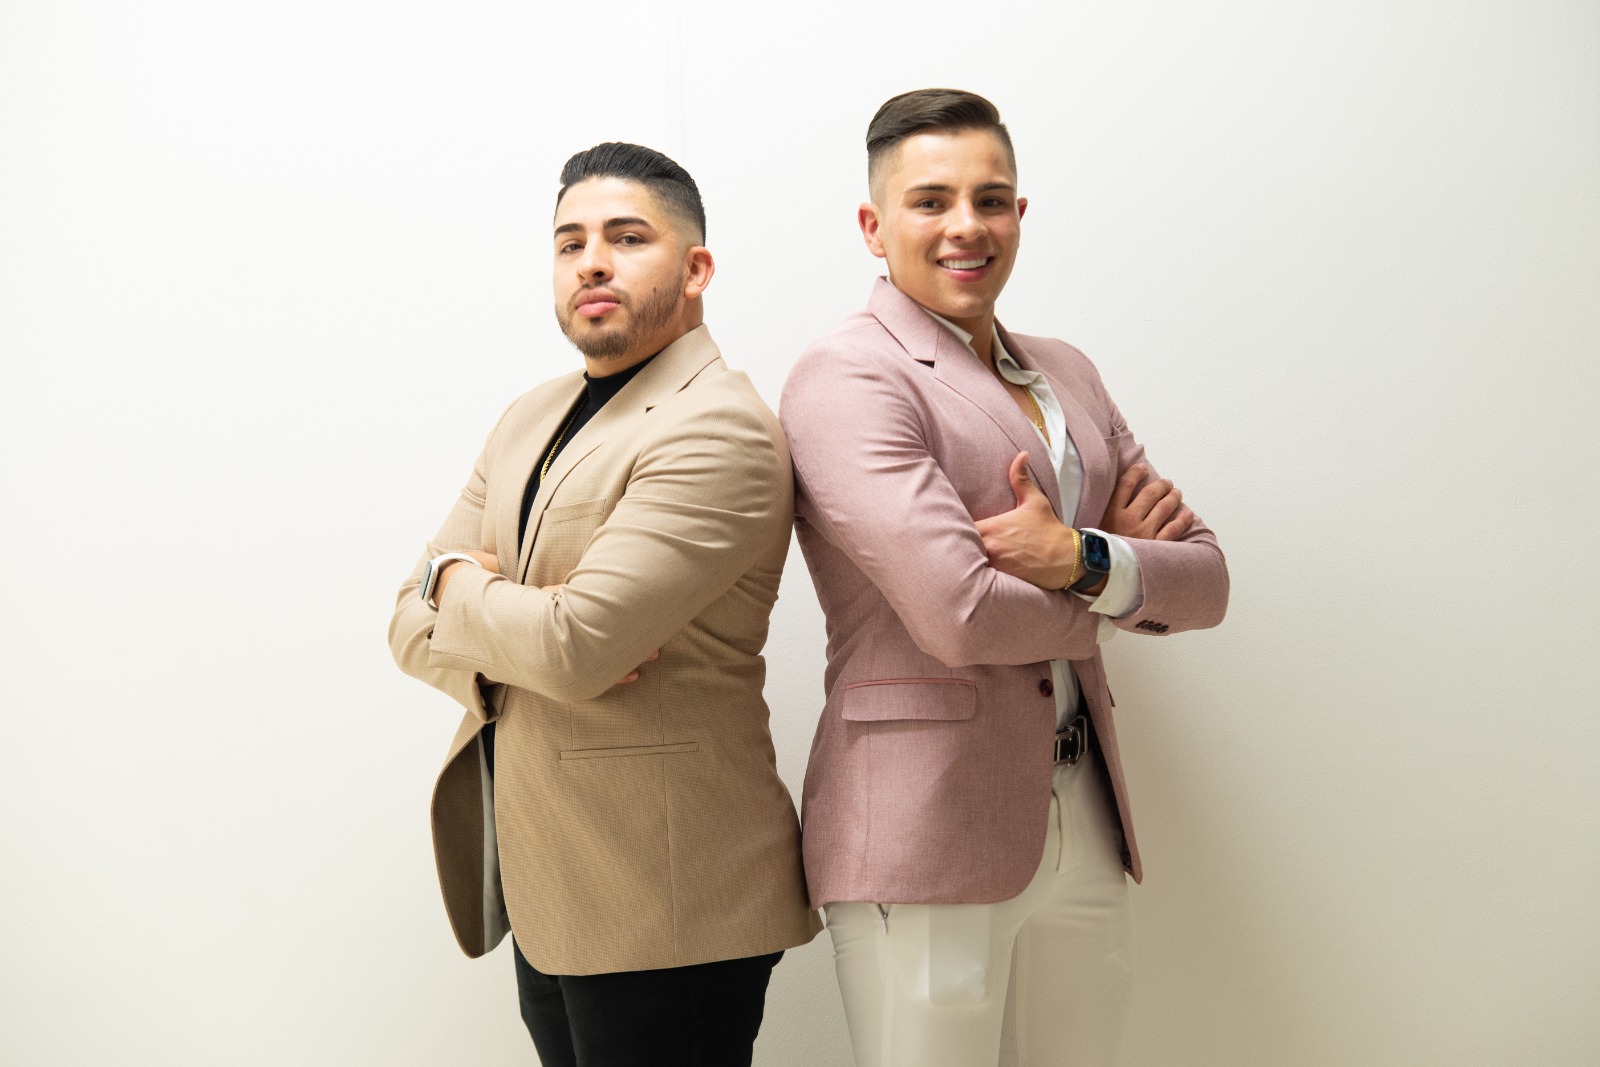 Through Conferences and Coaching, Kevin and Juan Daniel Escobar Have Helped More Than 100K People Grow Their Brands and Businesses